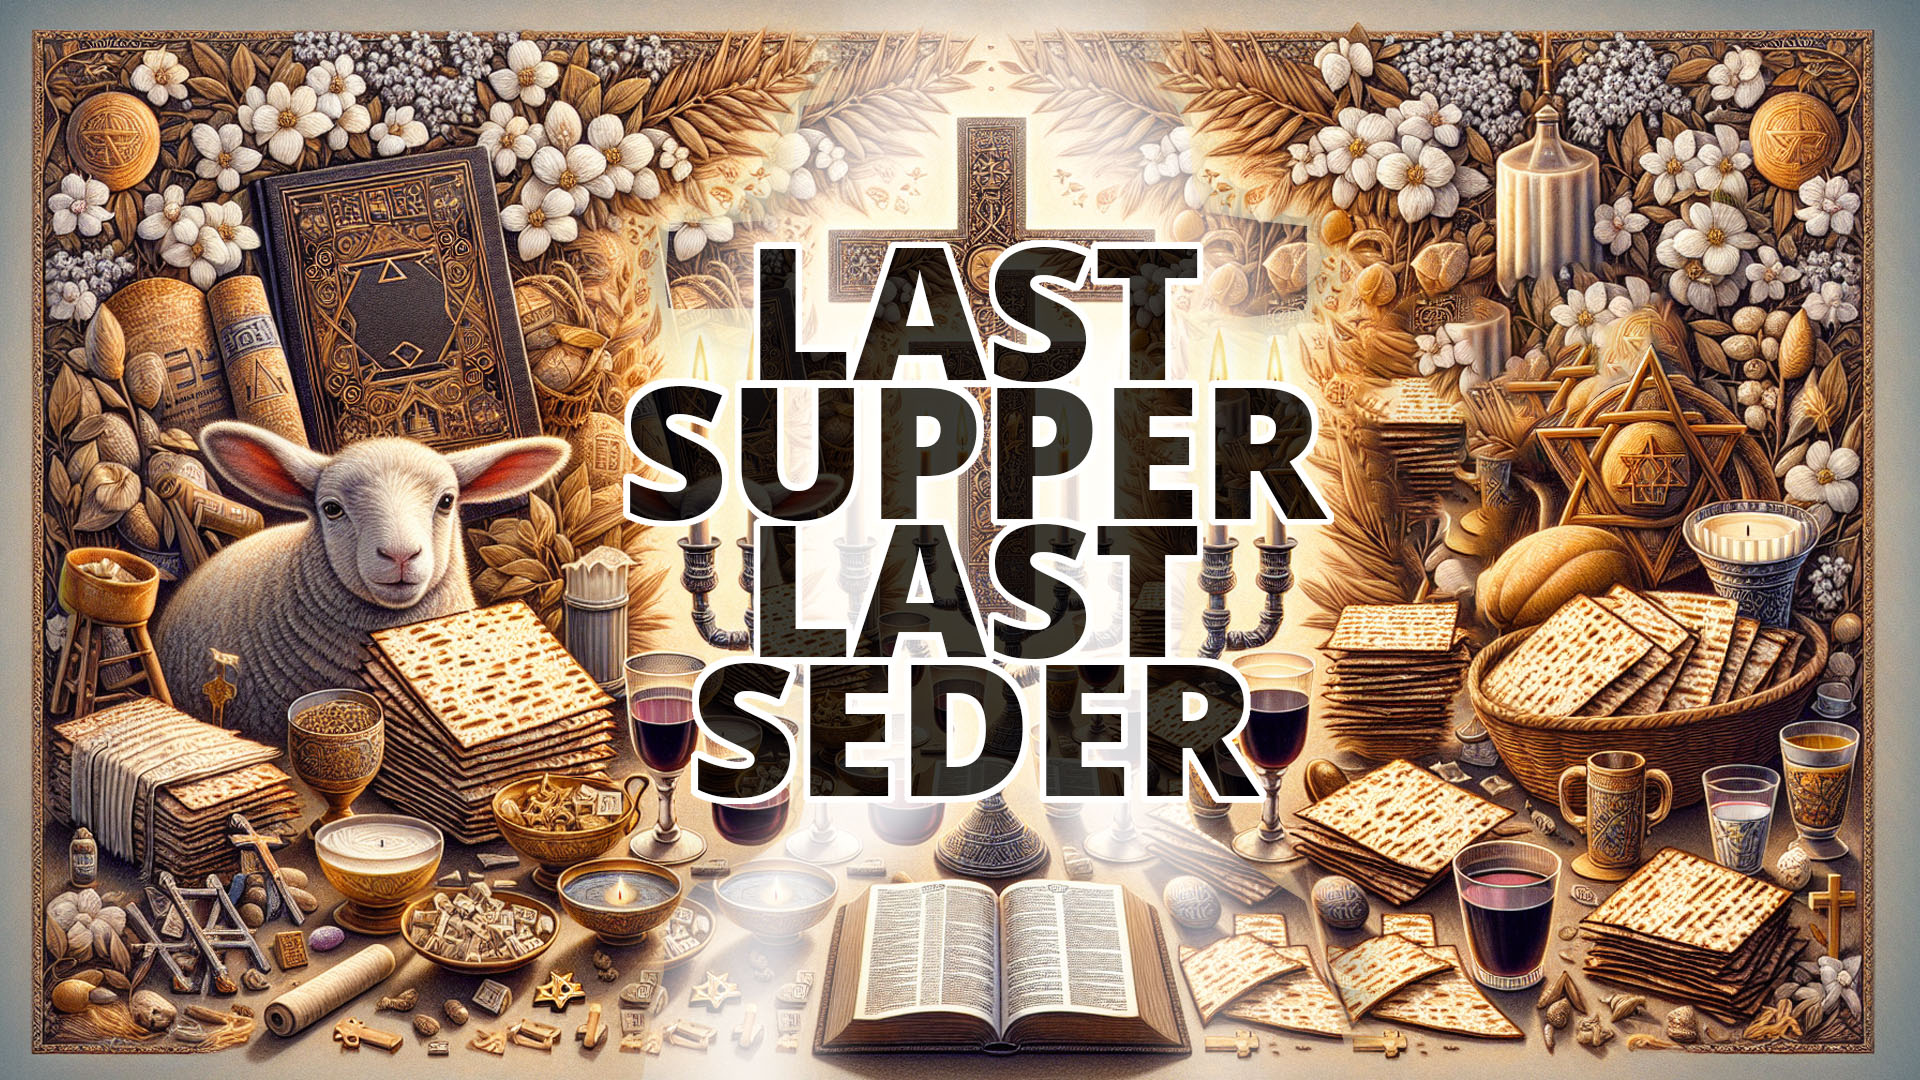 Was it the Last Supper or the Last Seder Rabbi jason Sobel Fusion Global passover